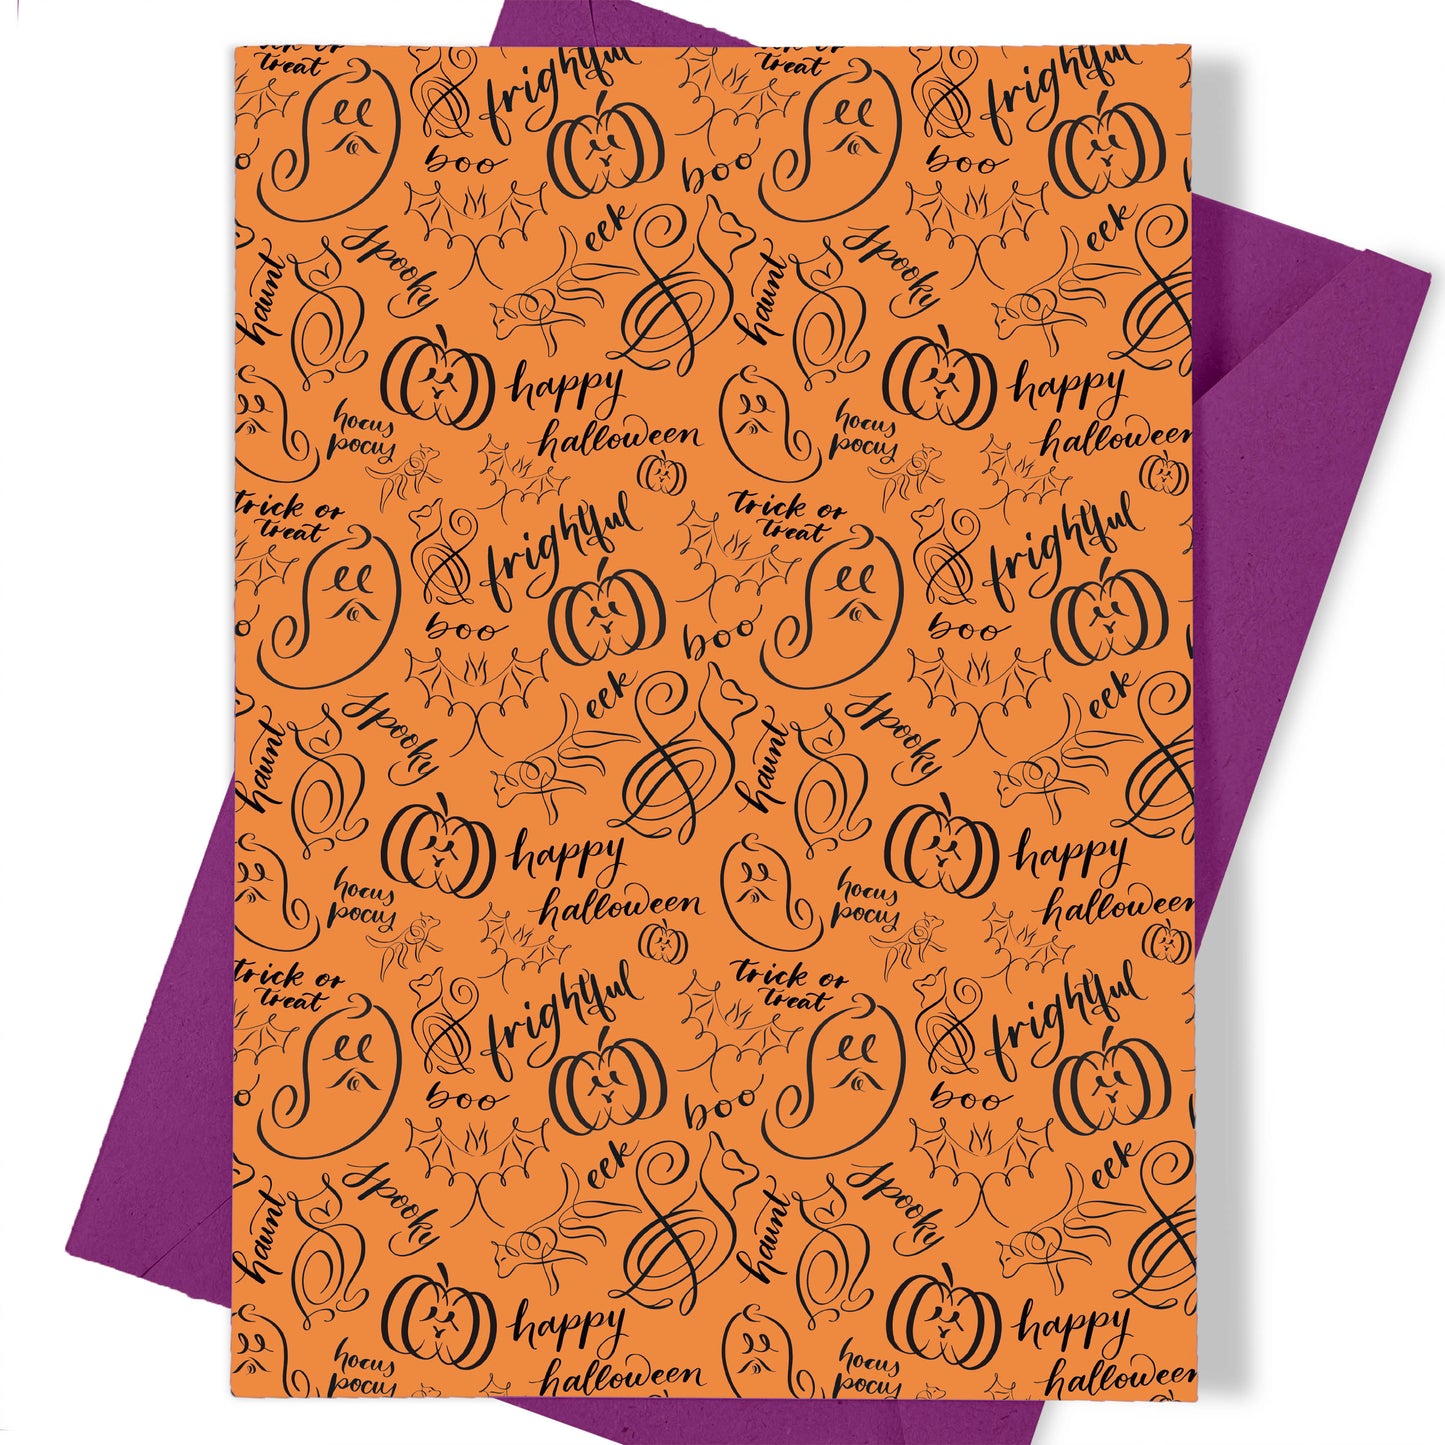 A thumbnail view of the halloween calligraphy card: "monster mash (light design)" repeating pattern